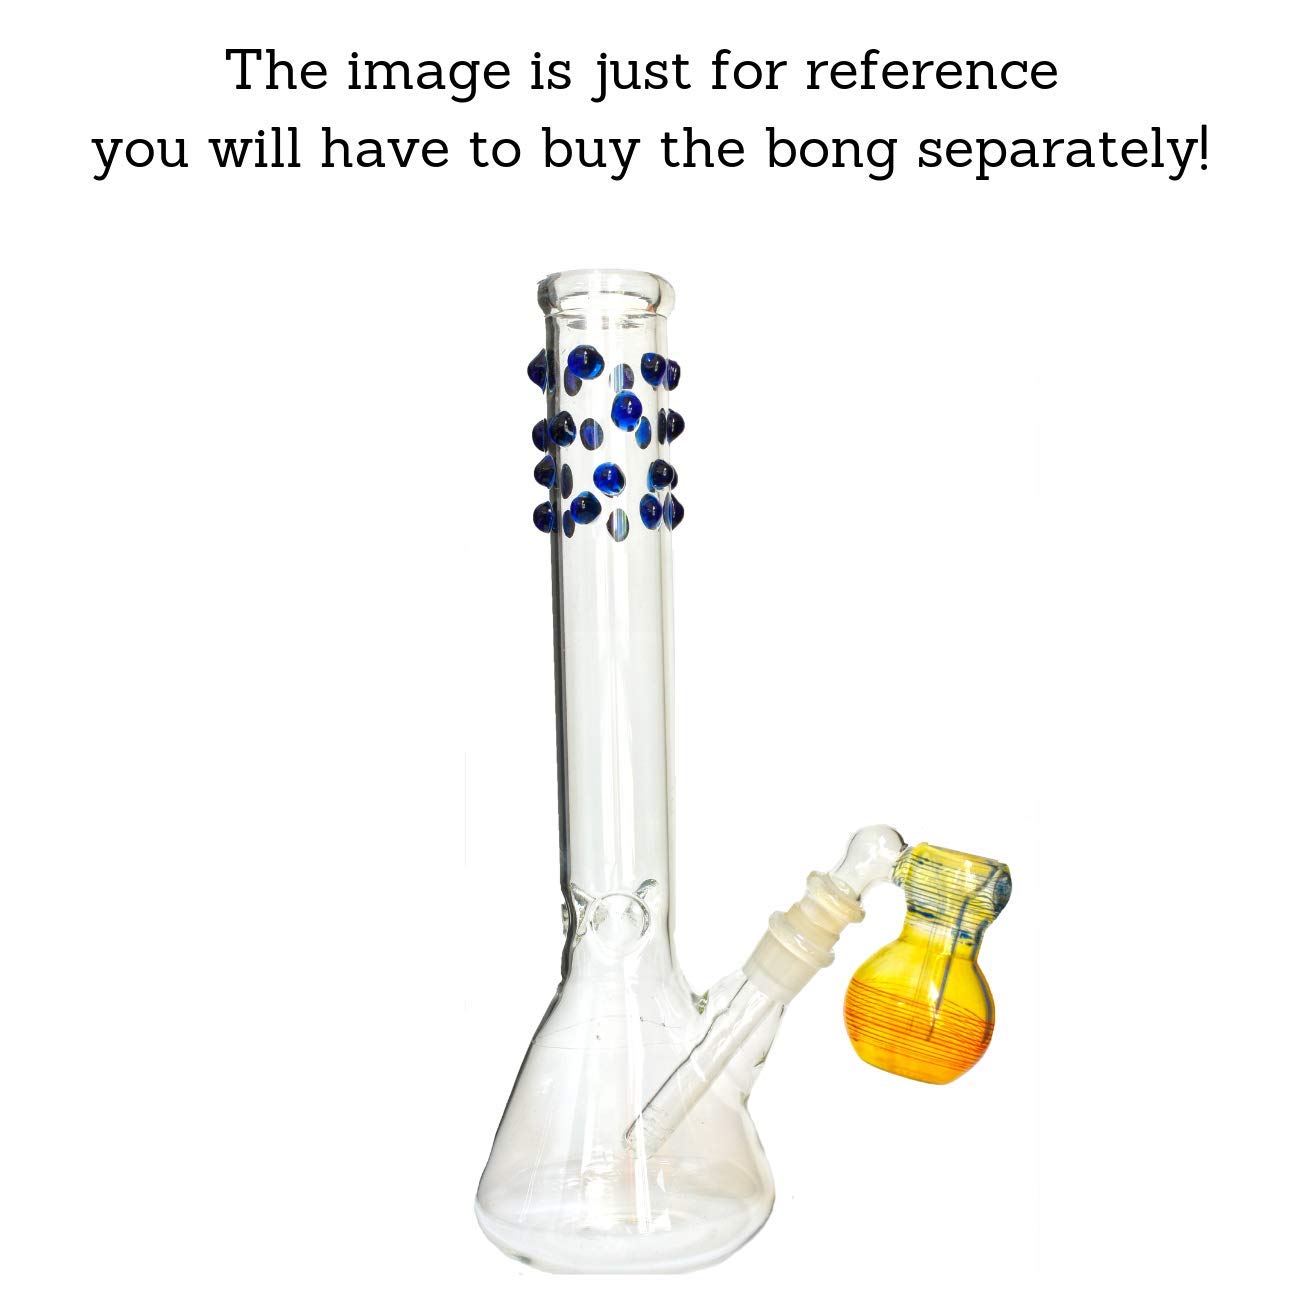 Male Ashcatcher - Bong Accessory | Keep Your Bong Clean